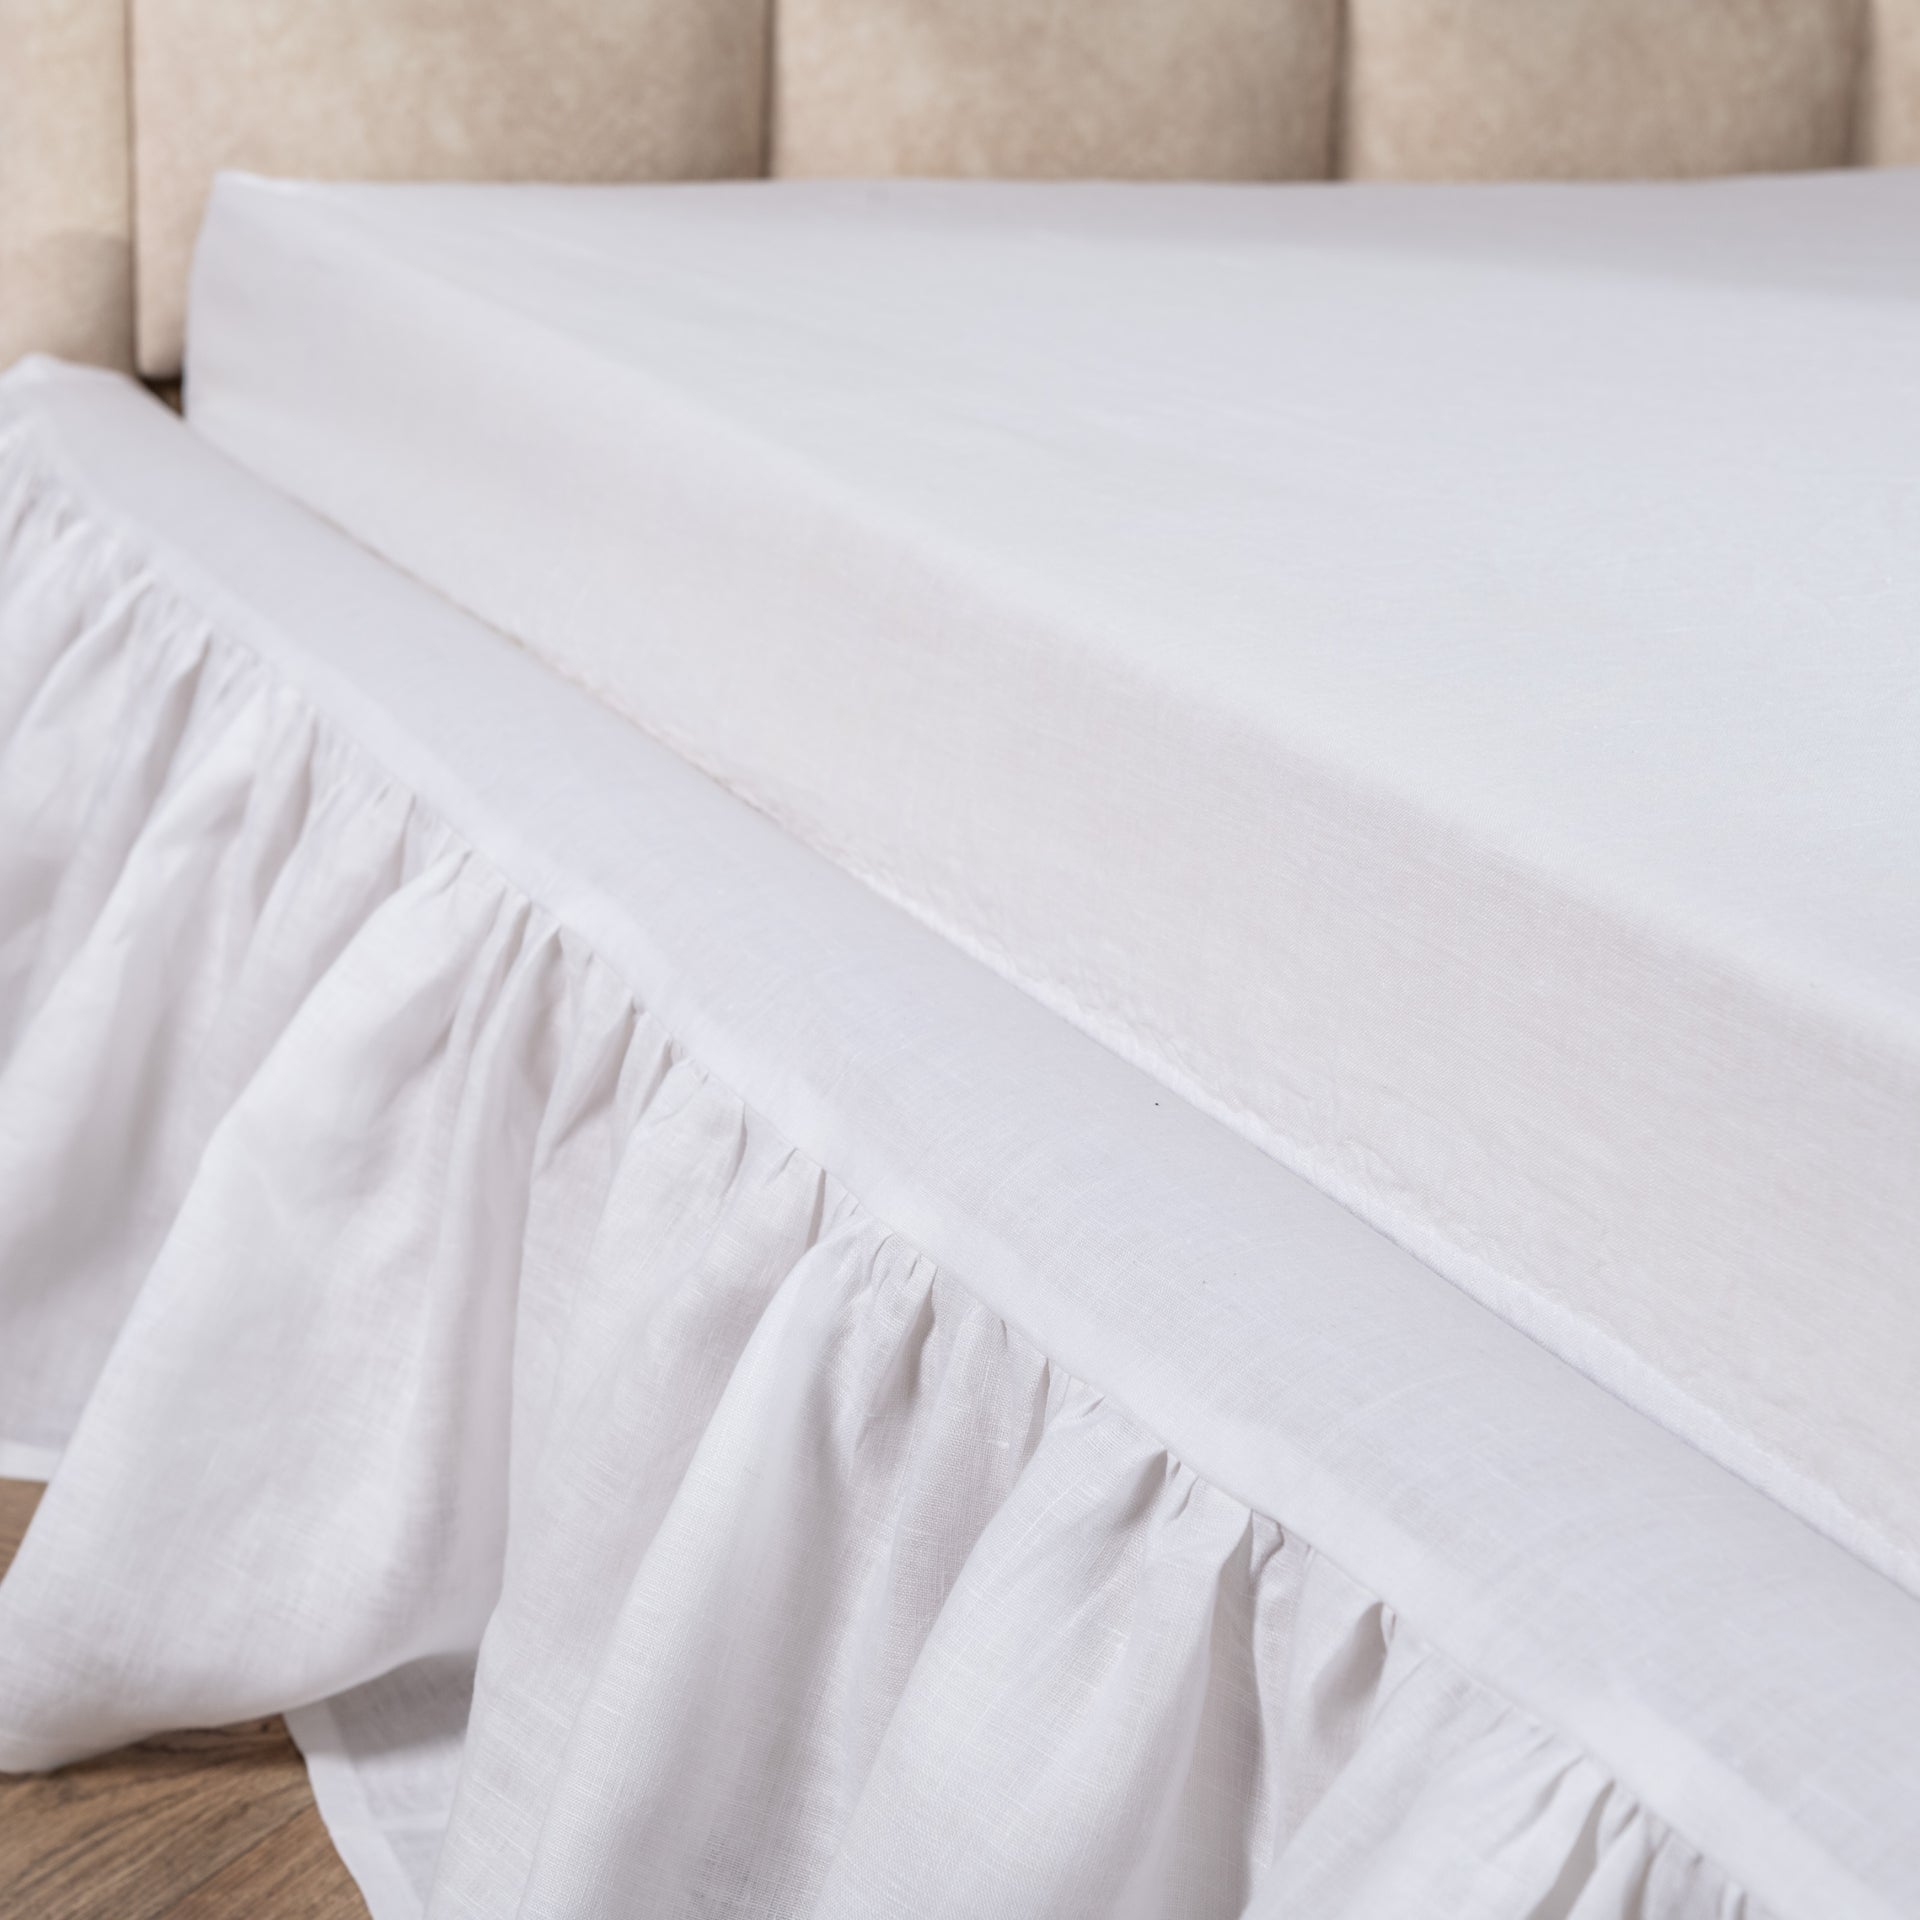 White Linen Bed Skirt with Gathered Ruffles and Cotton Decking - King